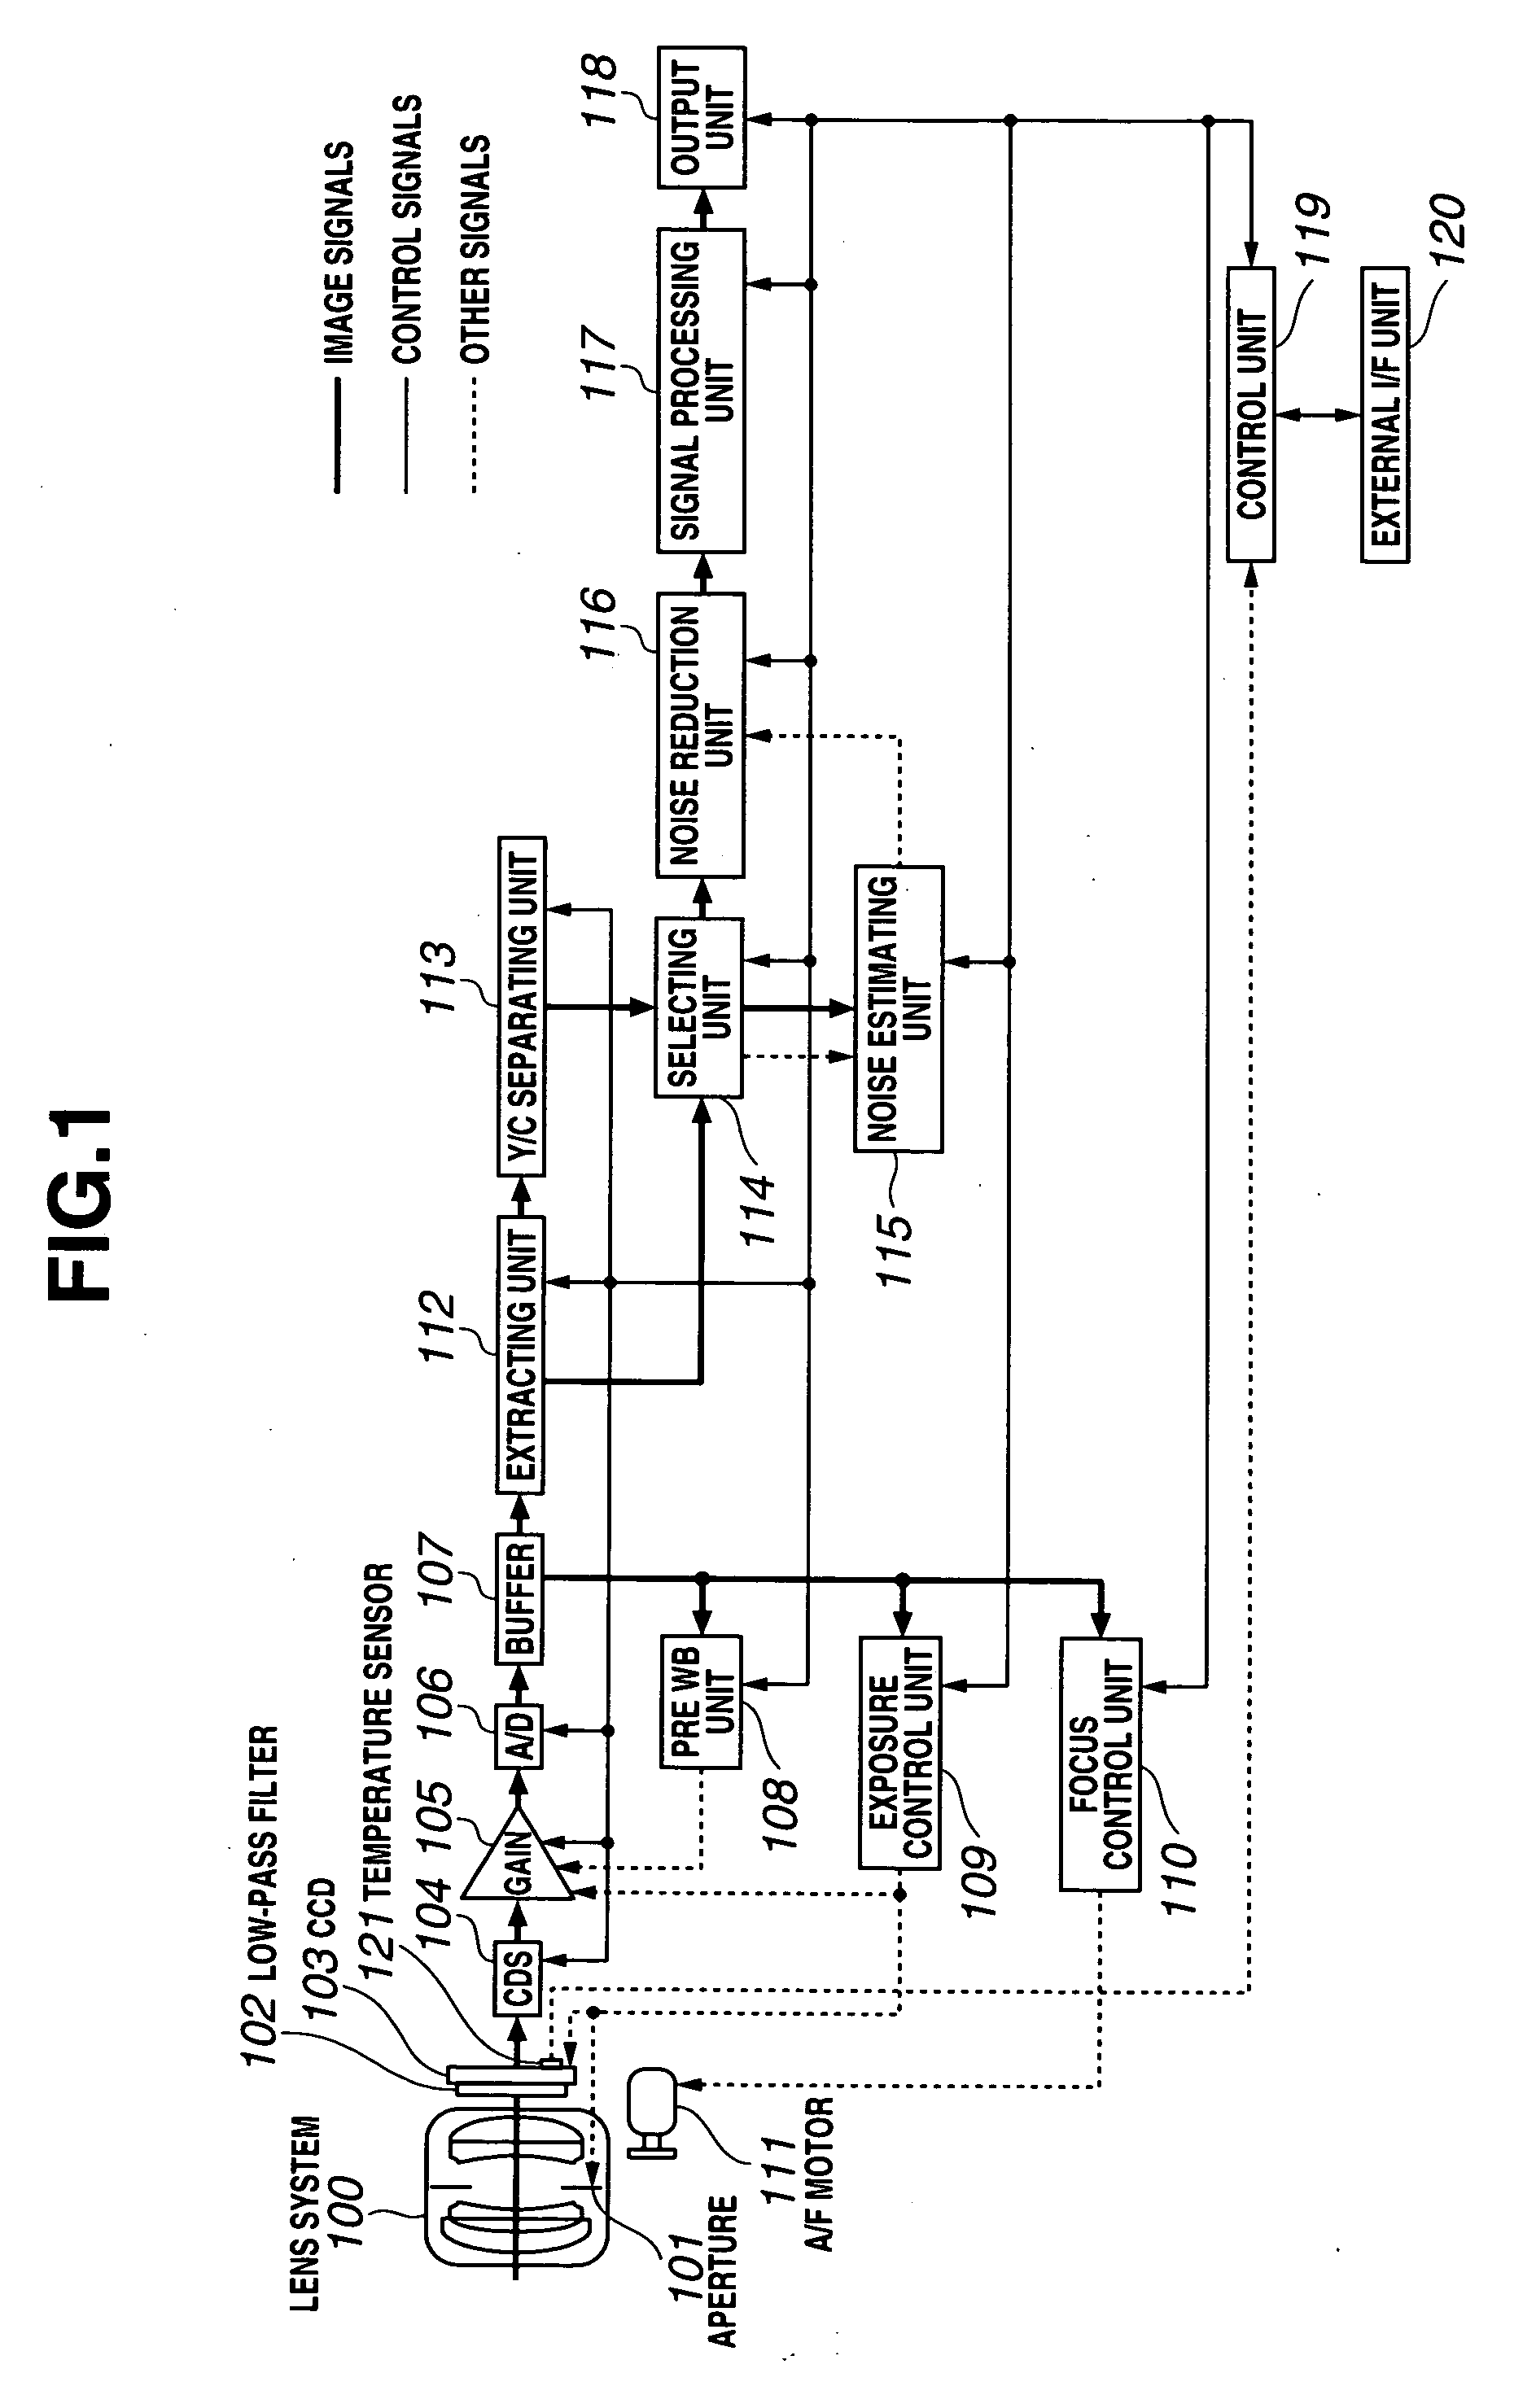 Signal processing system and signal processing program